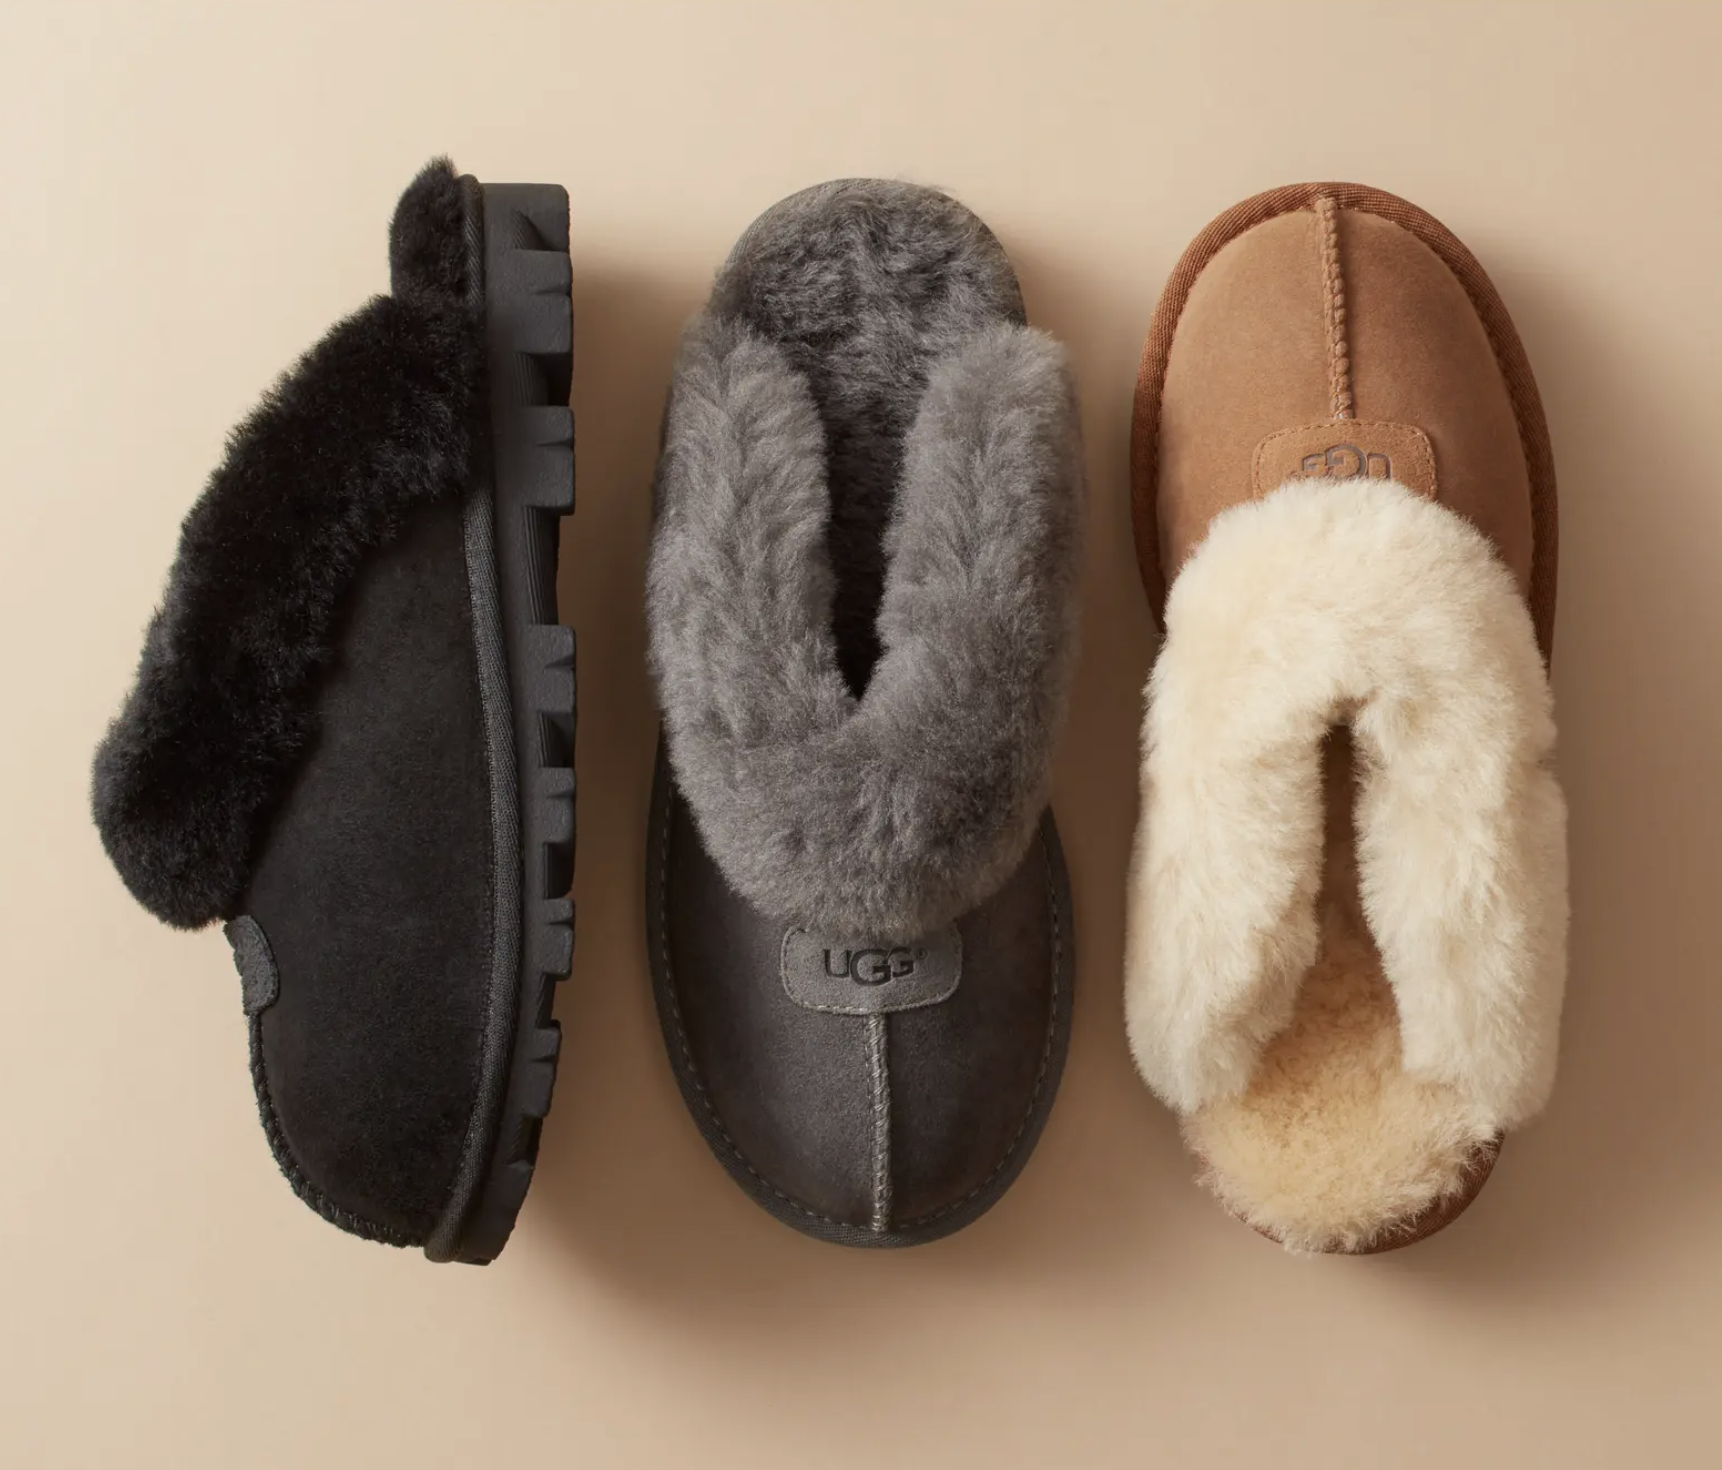 three slippers in a row